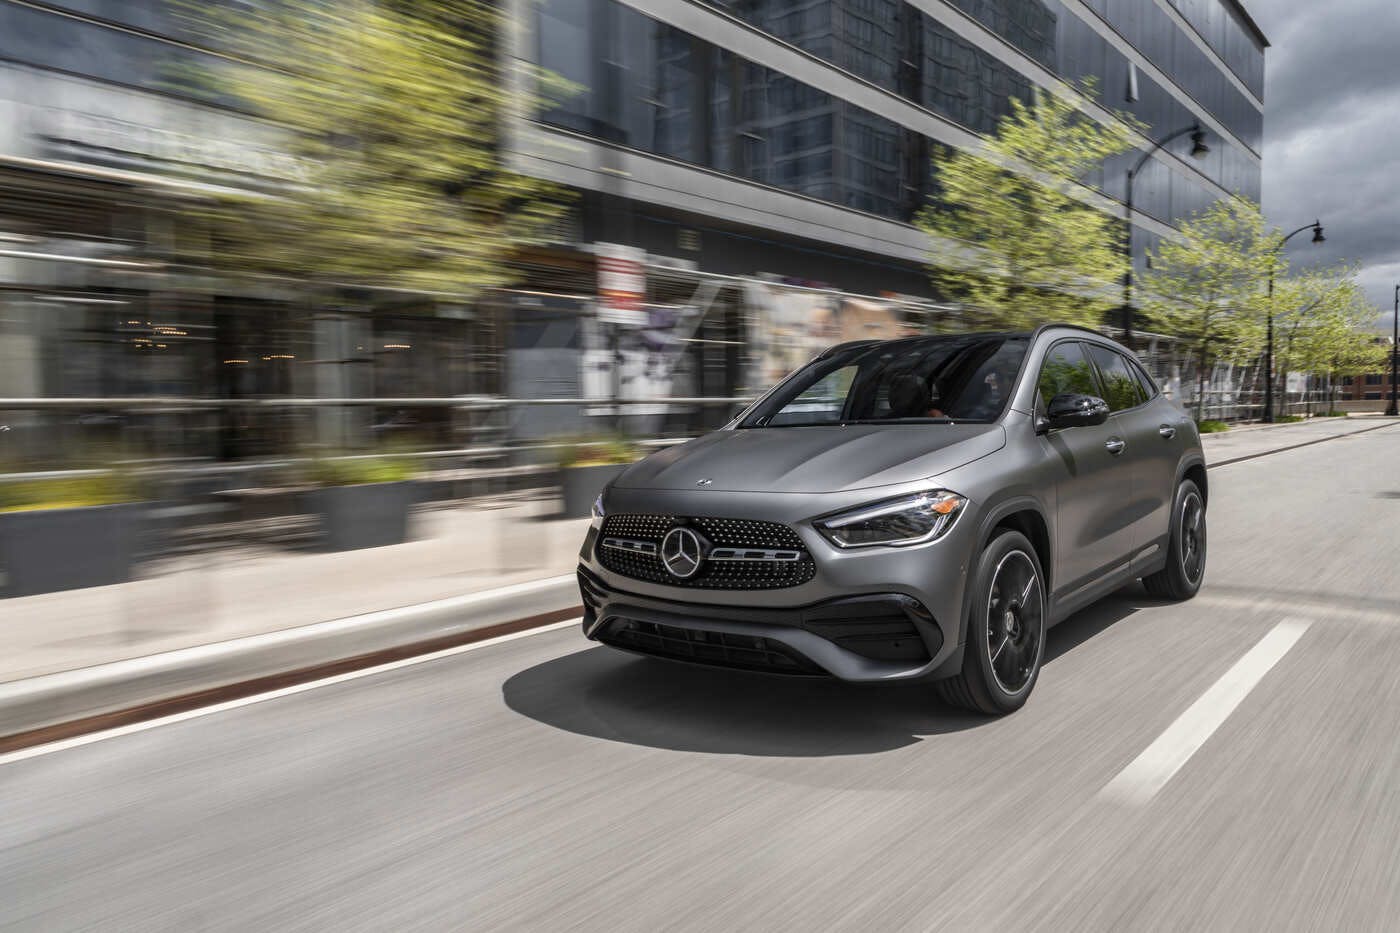 Mercedes Details It's New Sporty Compact SUV: The Mercedes-Benz GLA